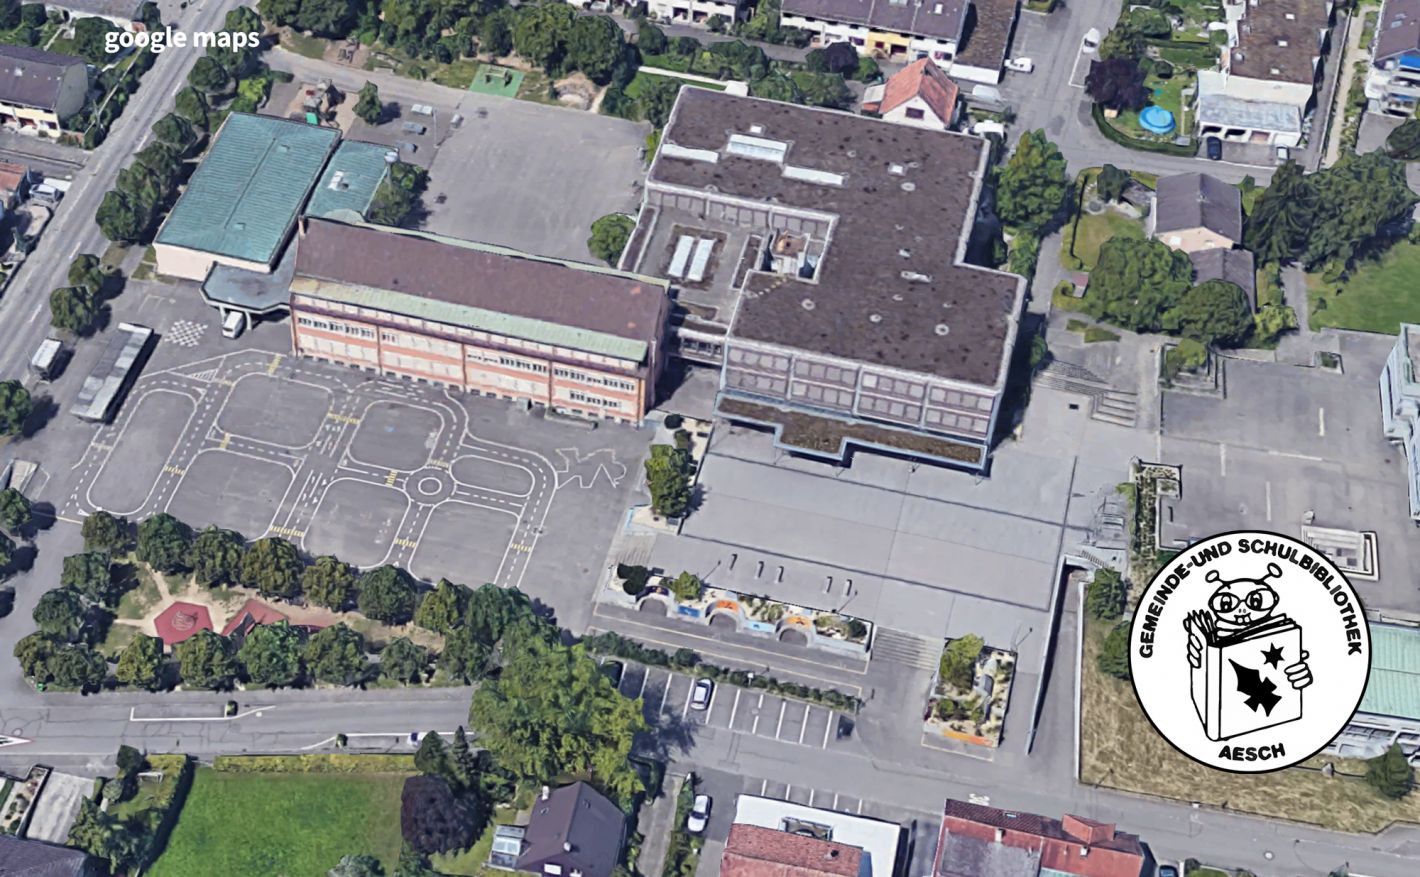 Google Maps screenshot of the community library from a bird's eye view